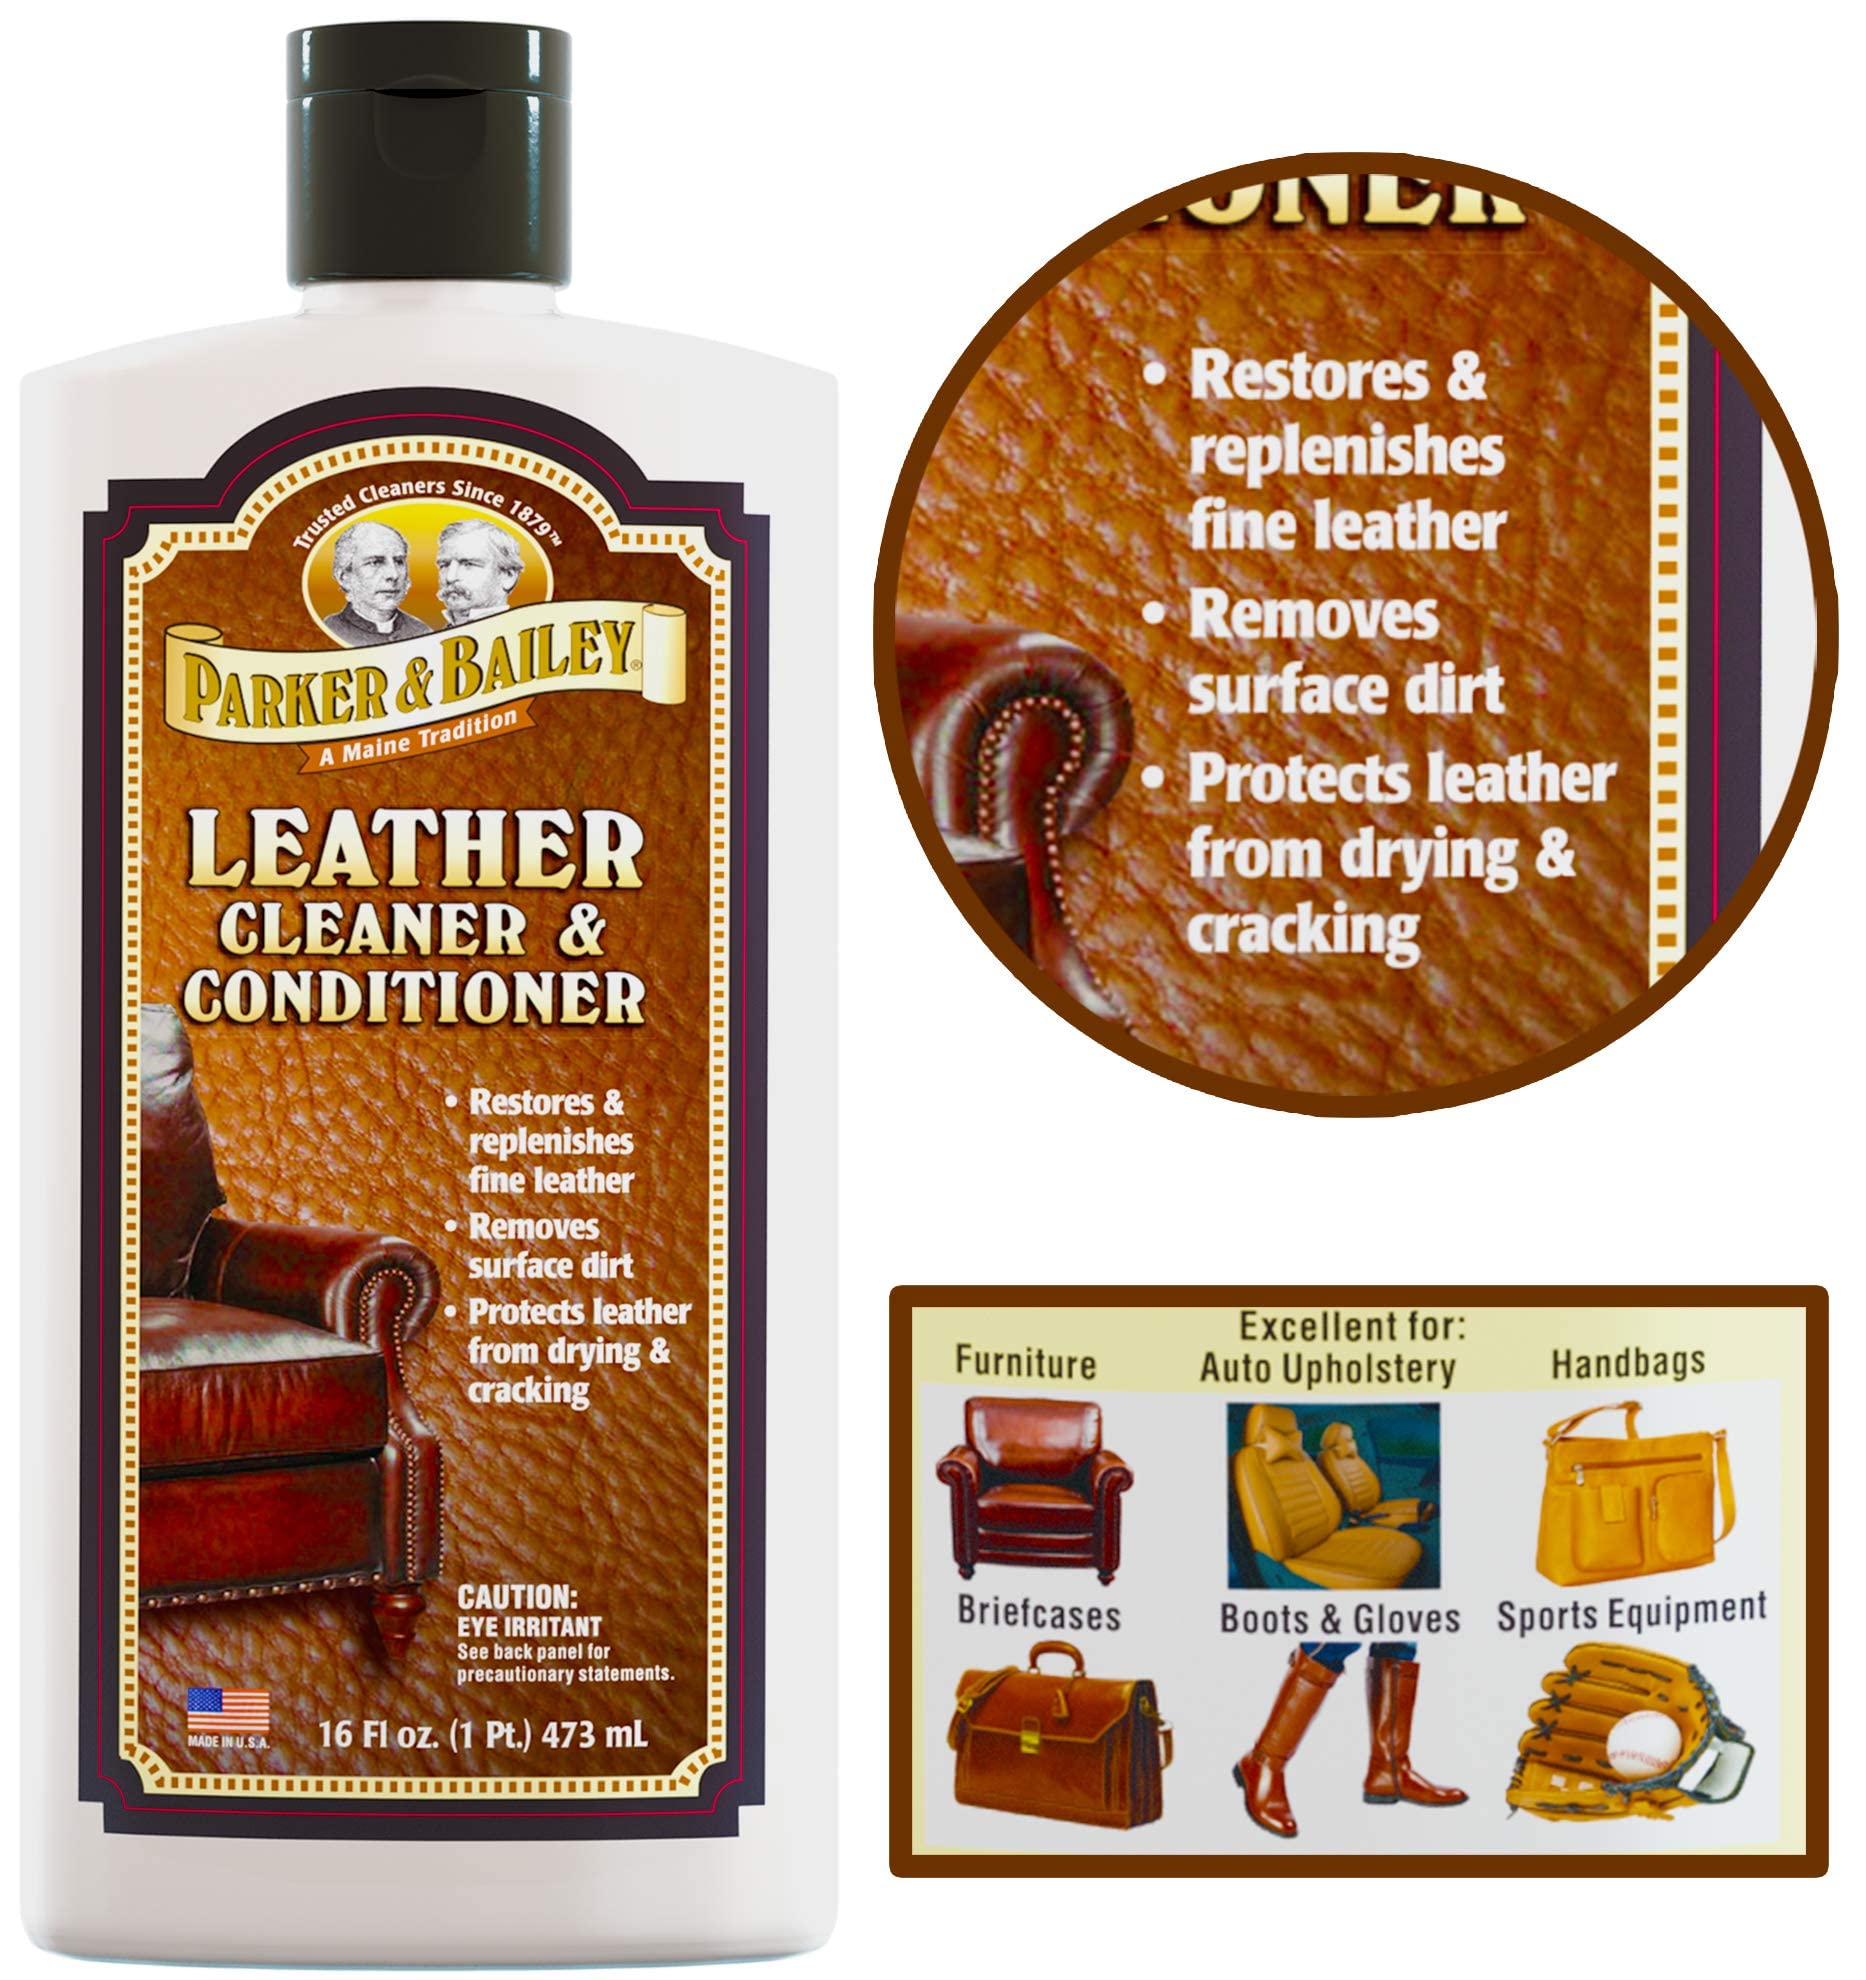 Premium Leather Conditioner / 2 oz / Perfect for Handbags & Leather Goods / Parker Clay / Certified B Corp